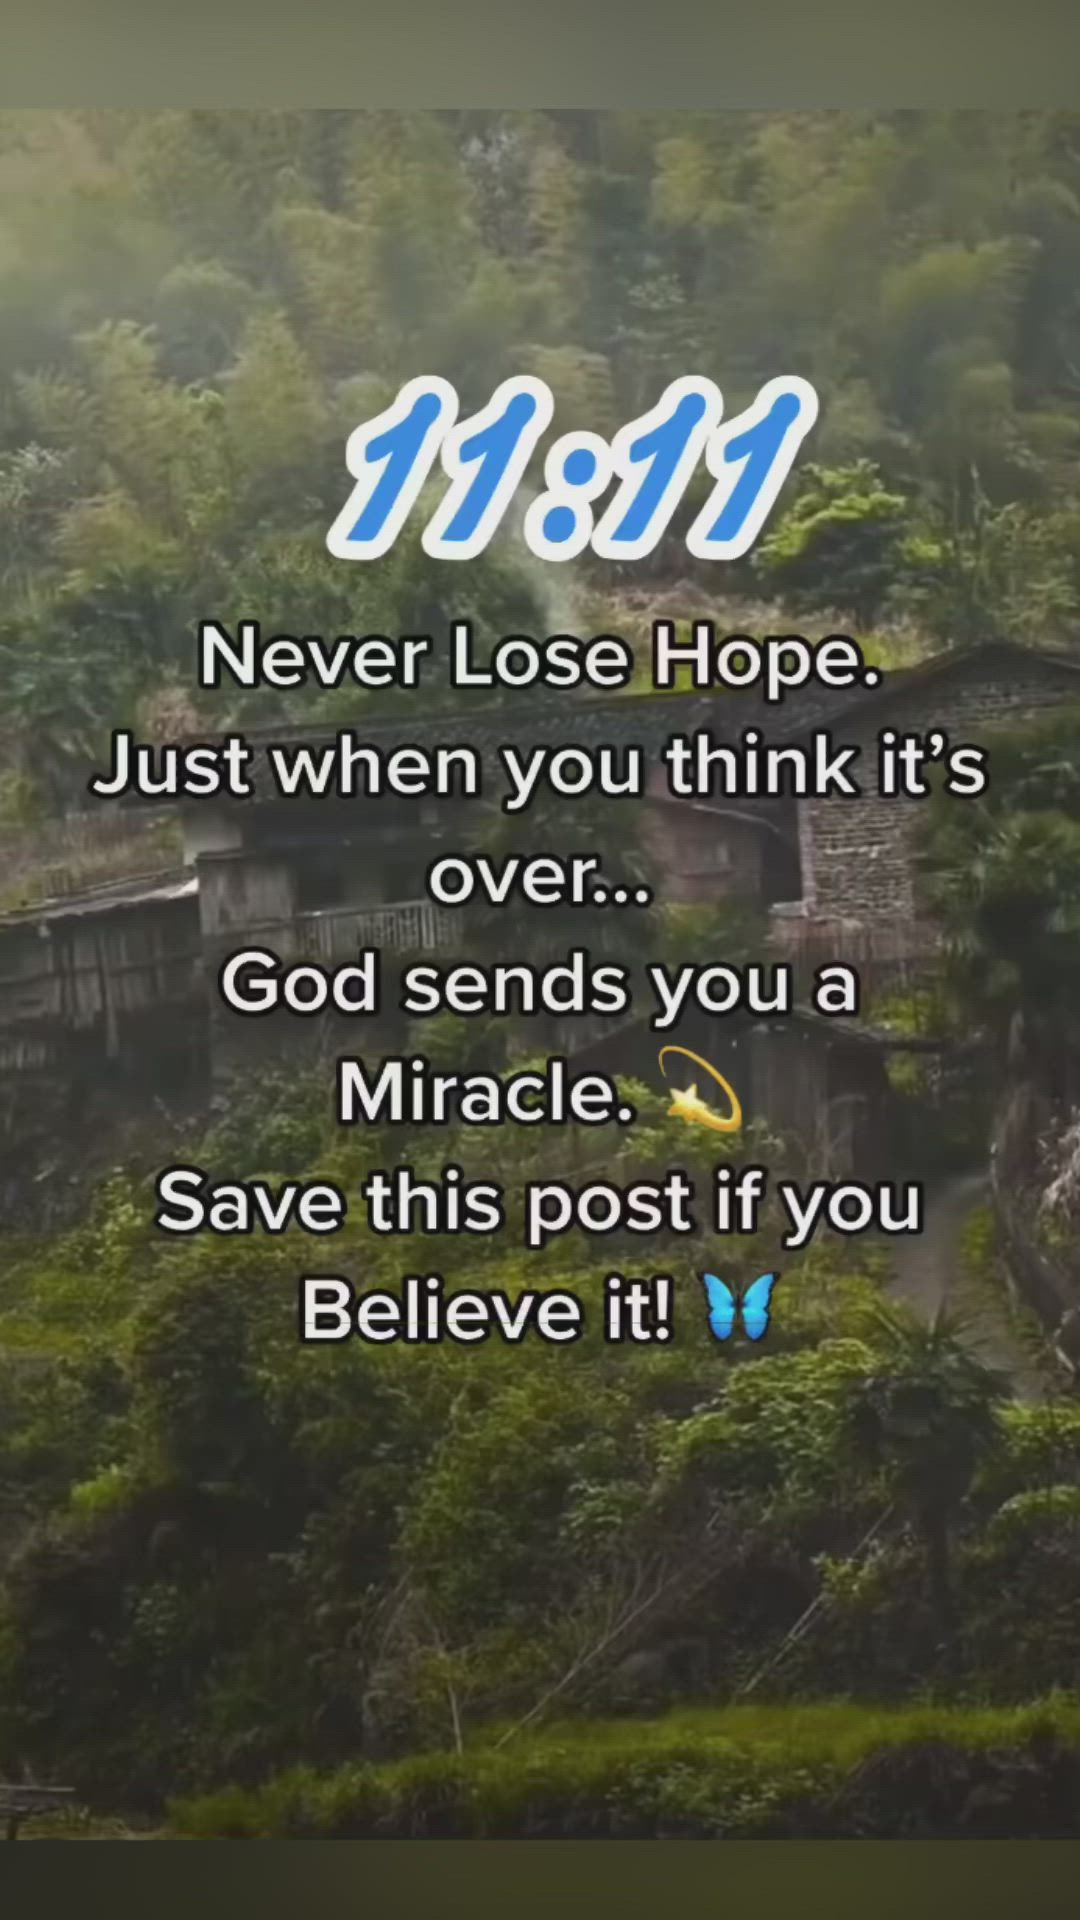 This contains an image of: Save this if you Believe!🦋 #1111 #manifestation #God #believe #abundance #love #miracle #hope